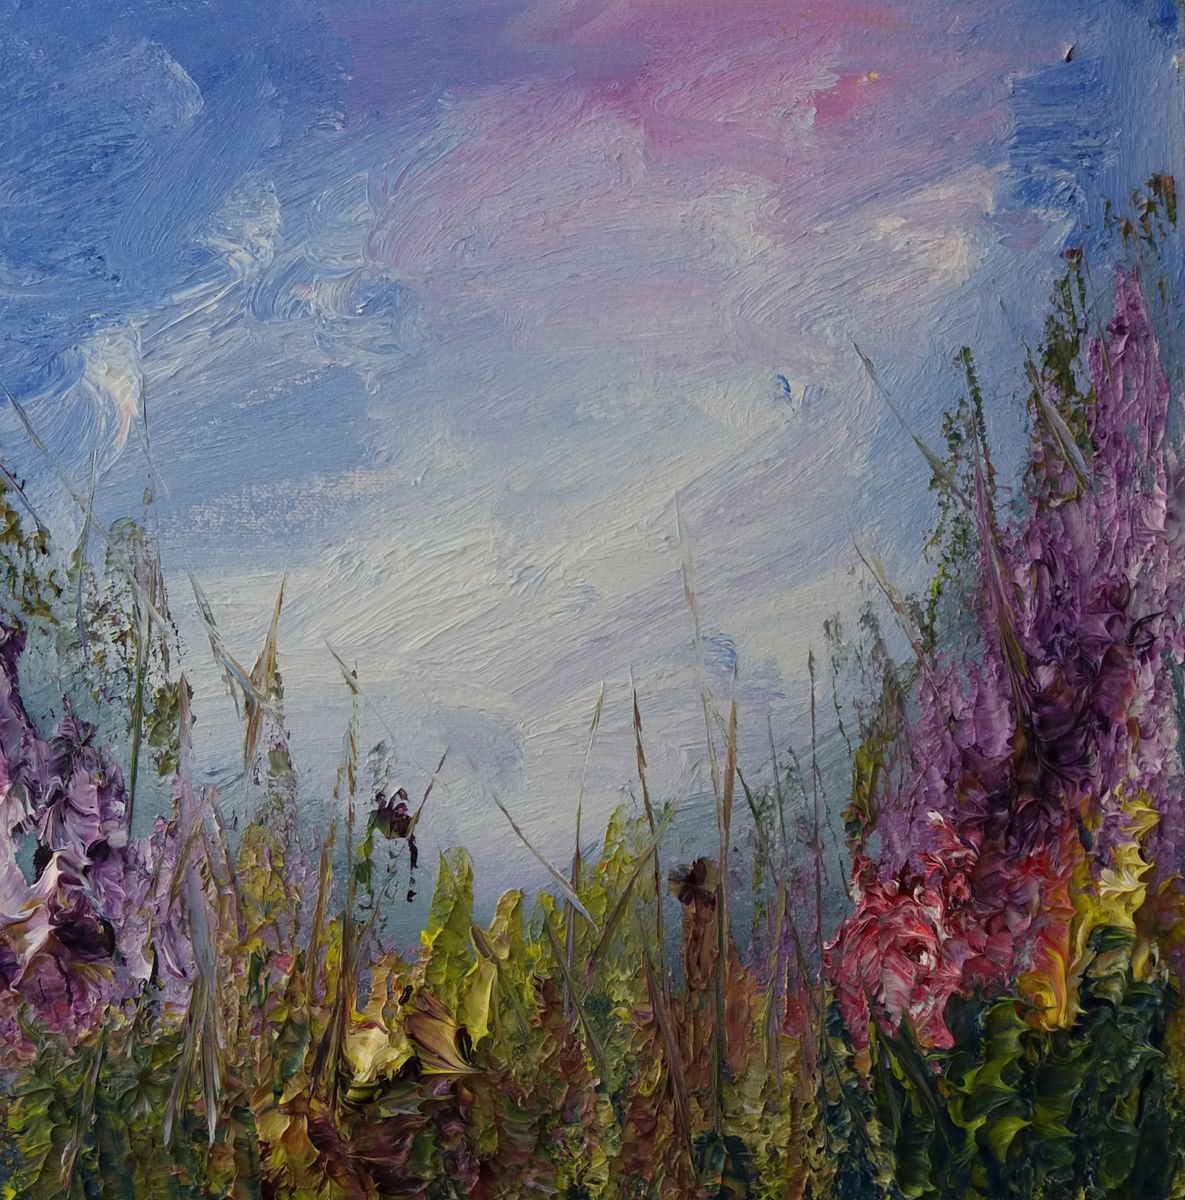 Essence of Summer - A Textured Abstract Landscape by Marjory Sime by Marjory Sime